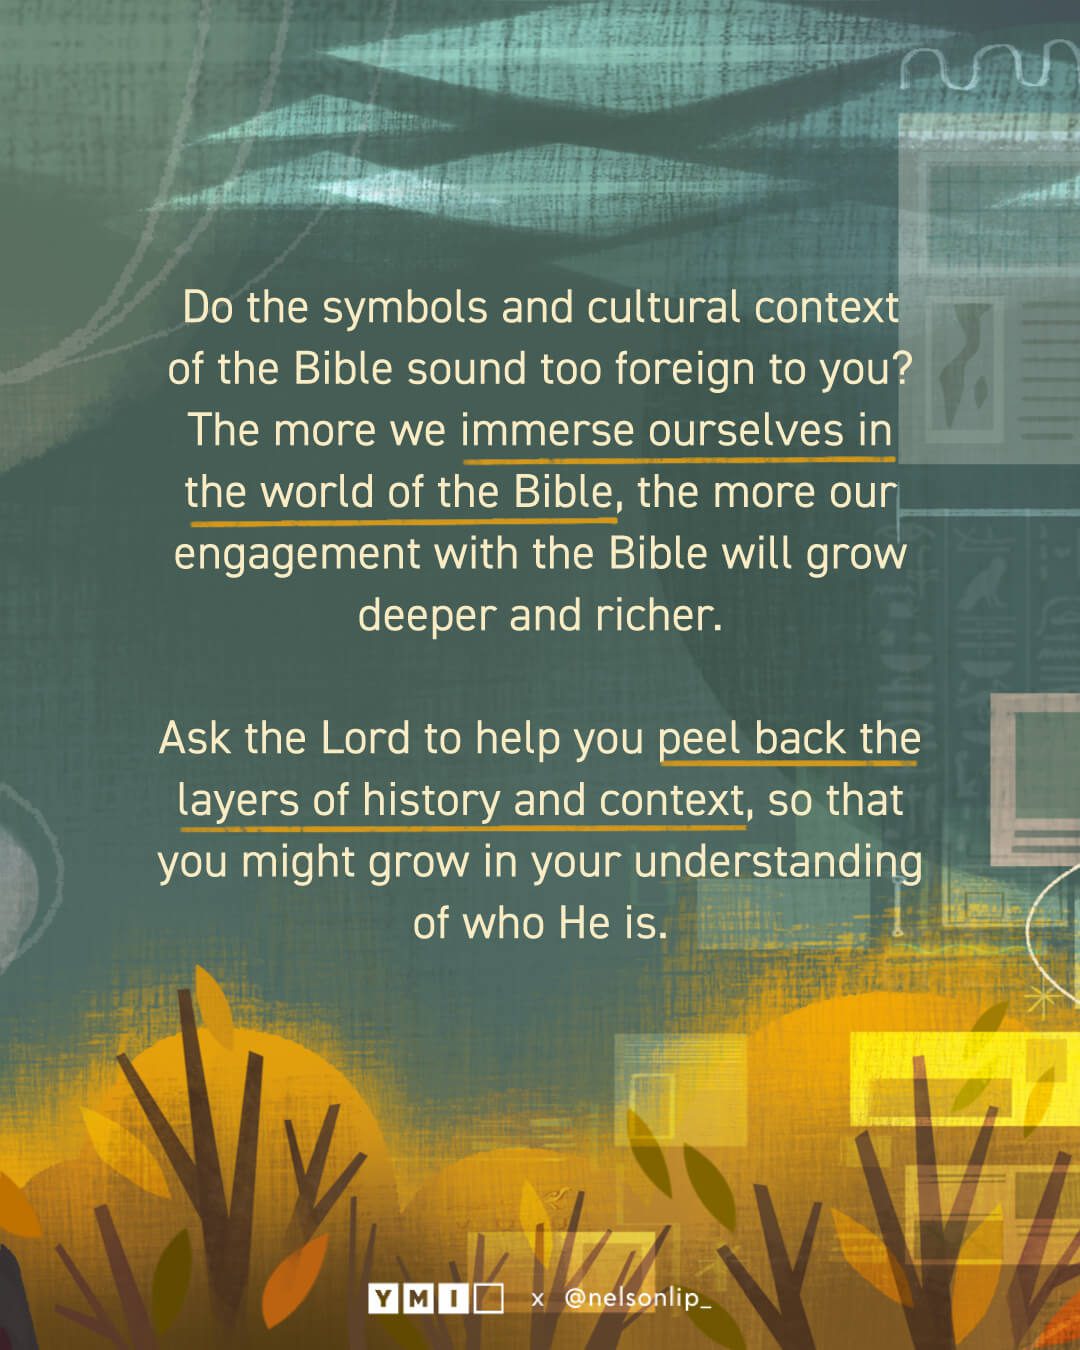 Background with the text of "Do the symbols and cultural context of the Bible sound too foreign to you? The more we immerse ourselves in the world of the Bible, the more our engagement with the Bible will grow deeper and richer. Ask the Lord to help you peel back the layers of history and context, so that you might grow in your understanding of who He is. "